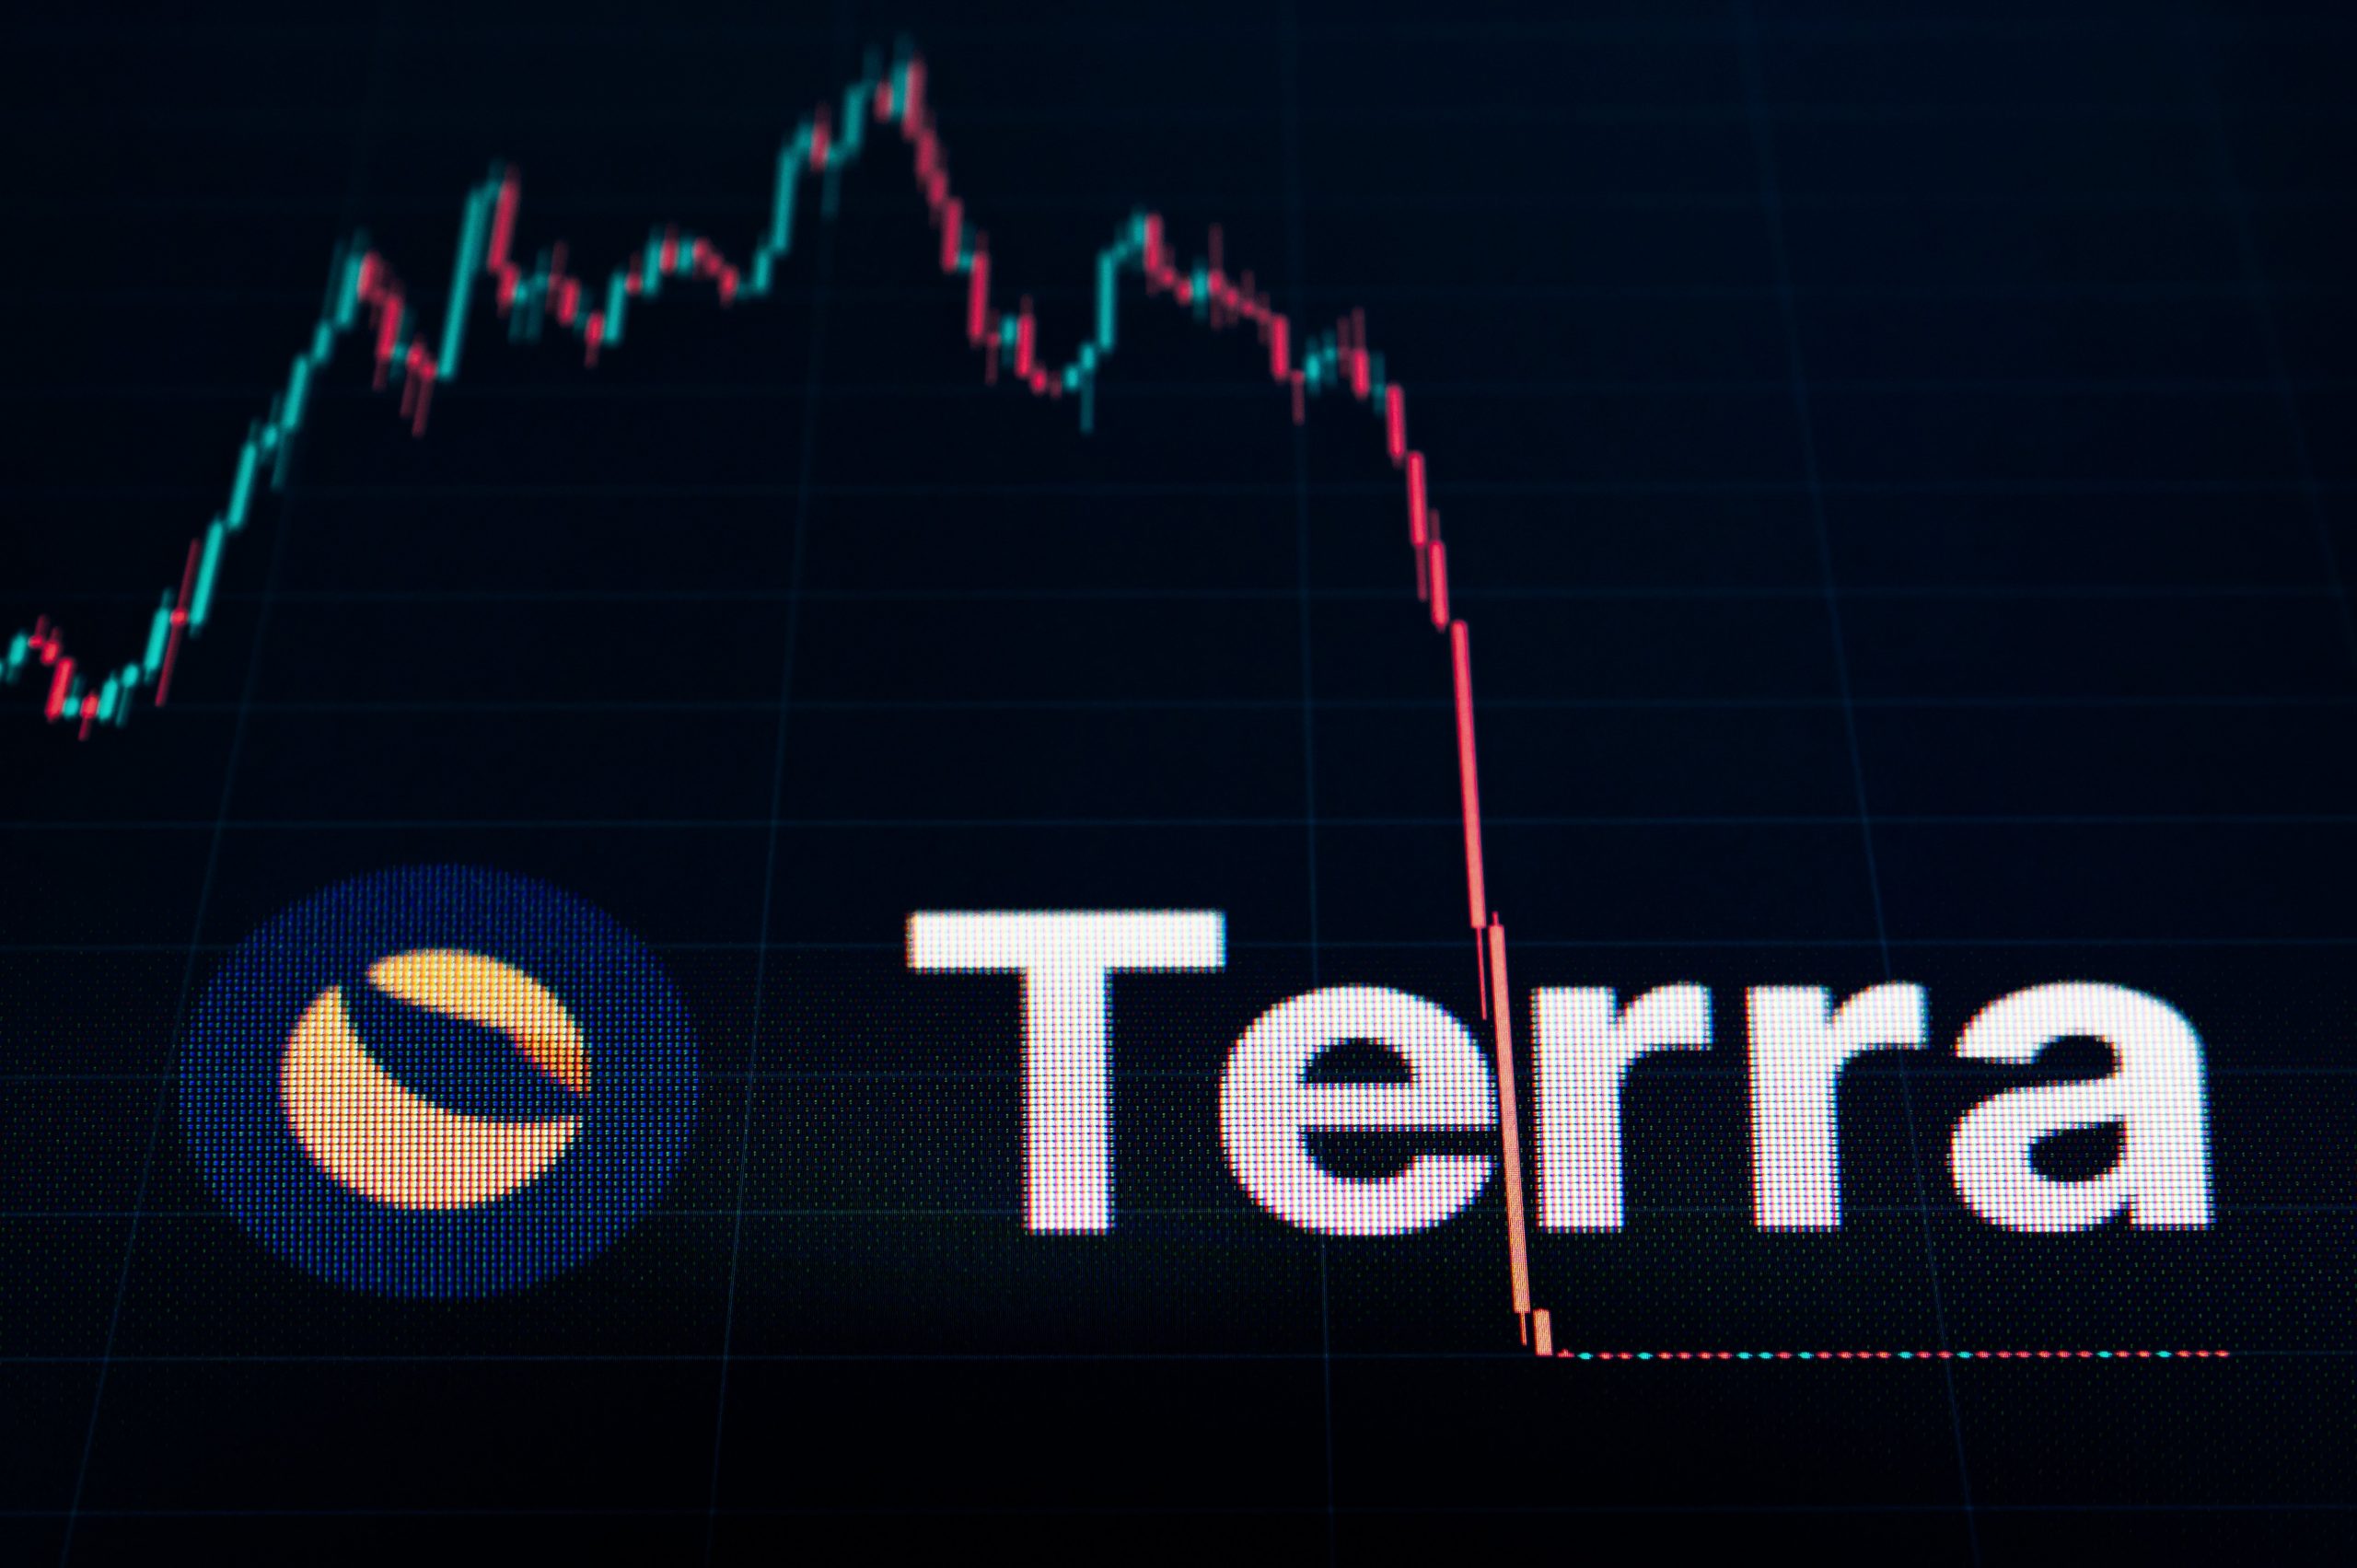 Arrest warrant issued for Do Kwon, creator of failed stablecoin Terra